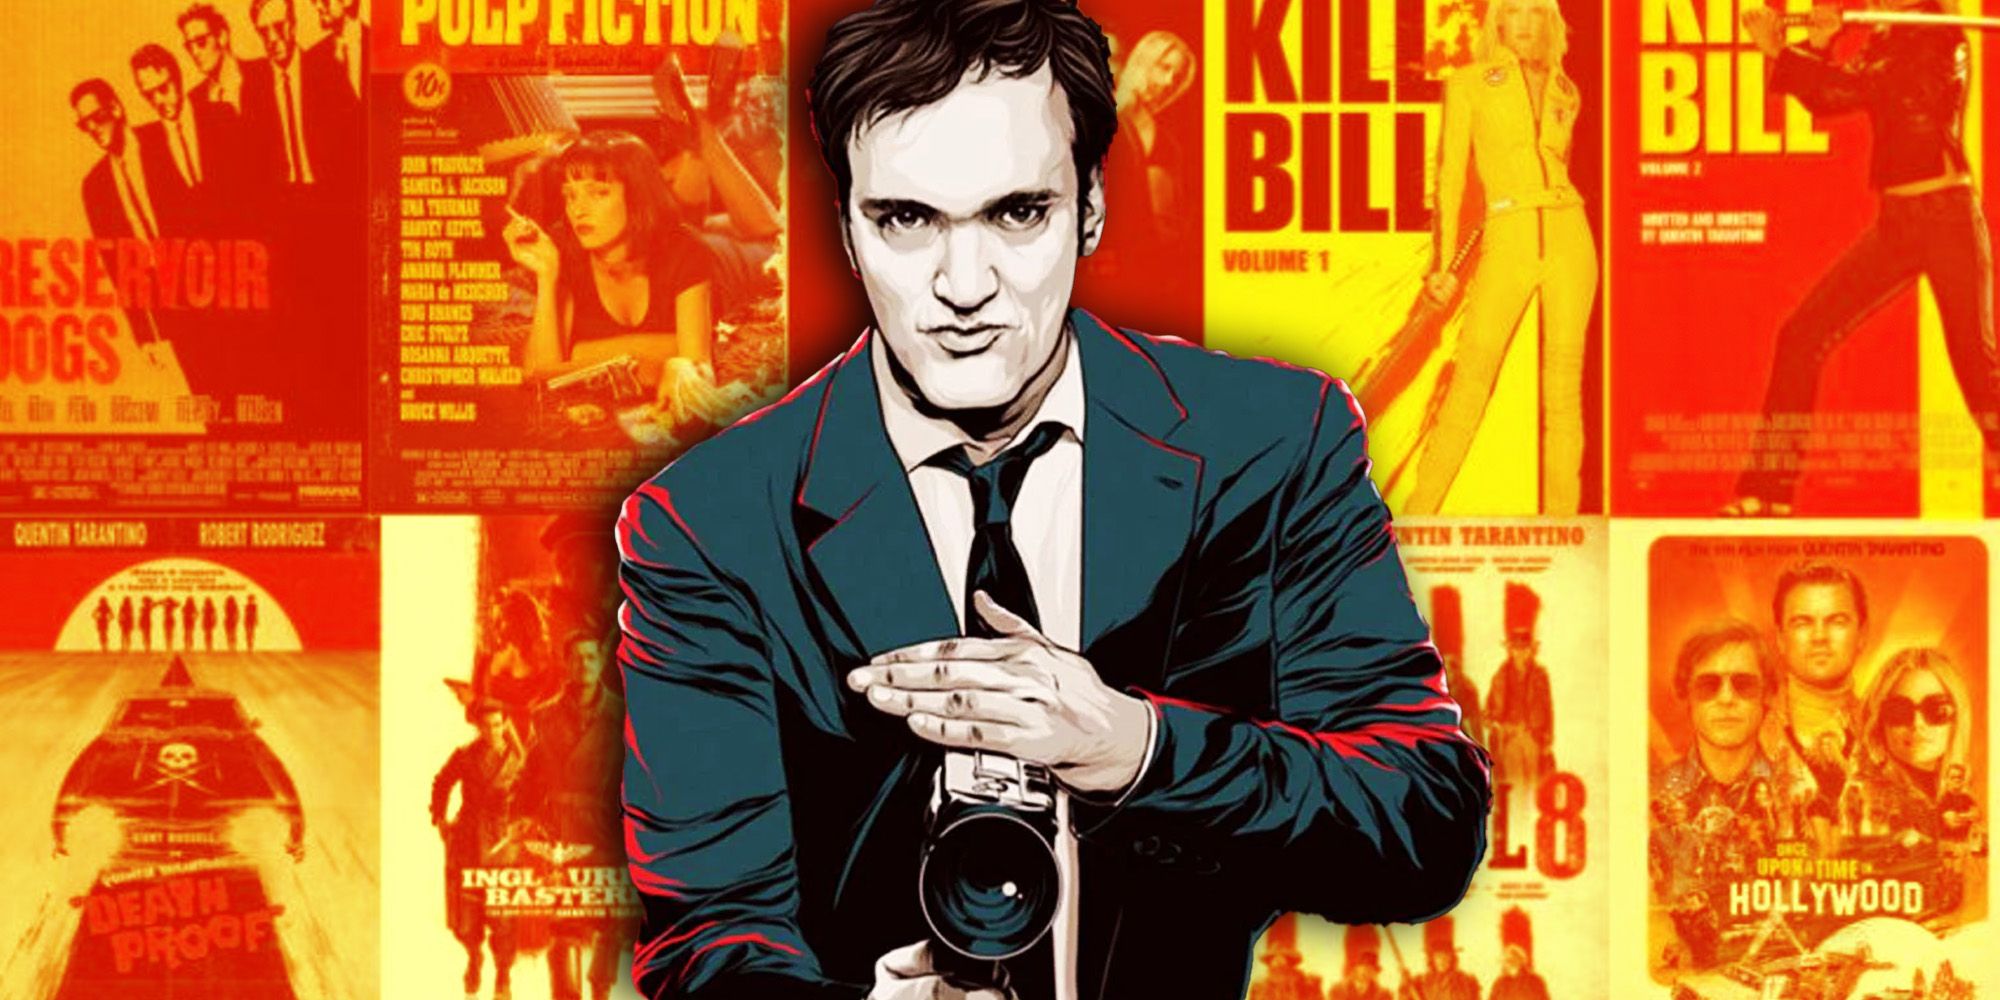 An animated Quentin Tarantino with posters of his movies in the background